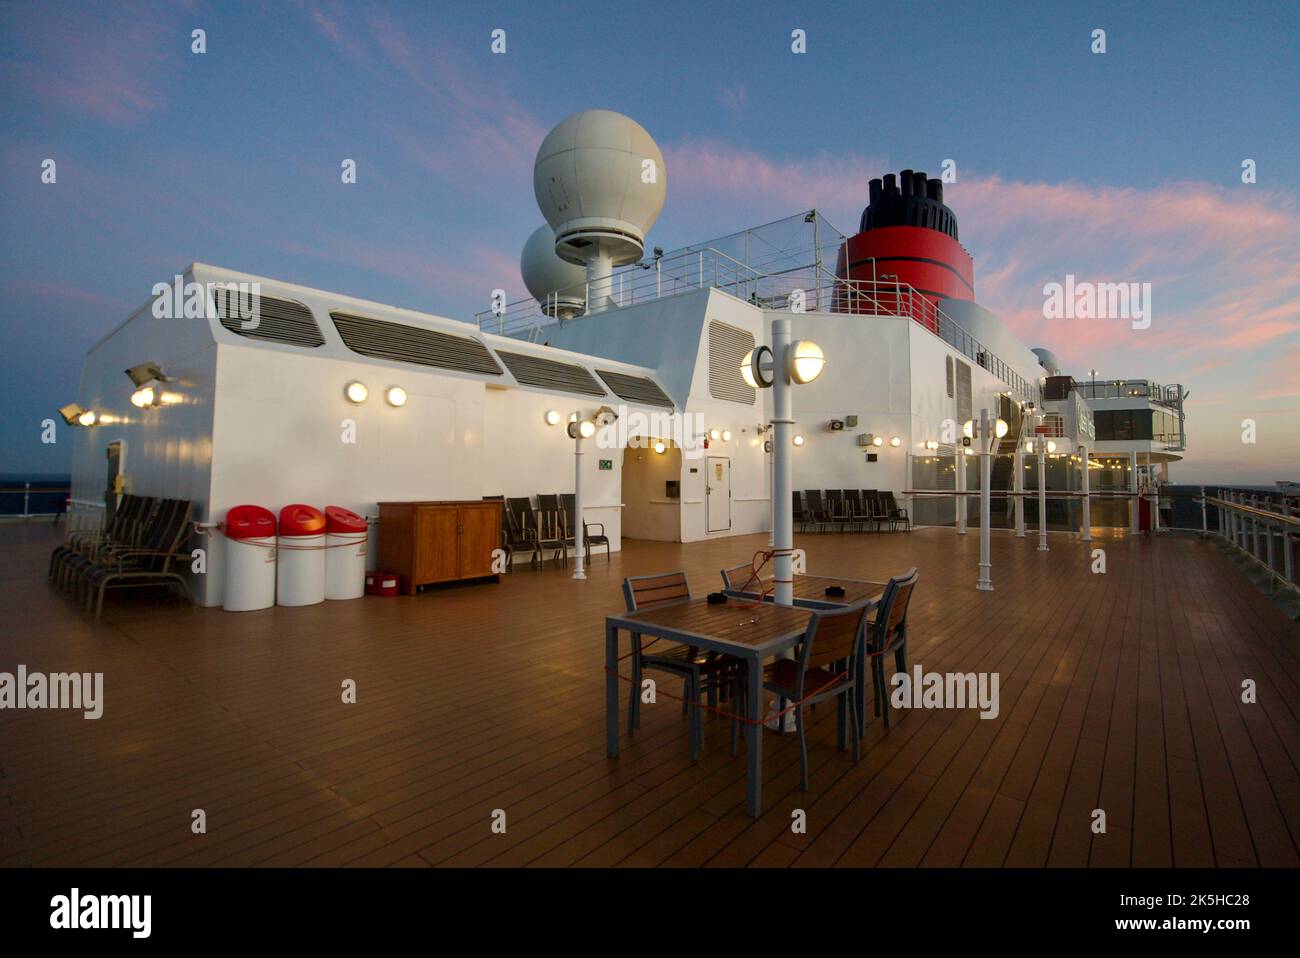 The view on the top deck of the Queen Victoria cruise ship, a Cunard cruise. Queen Victoria top deck at night, sunset. Stock Photo